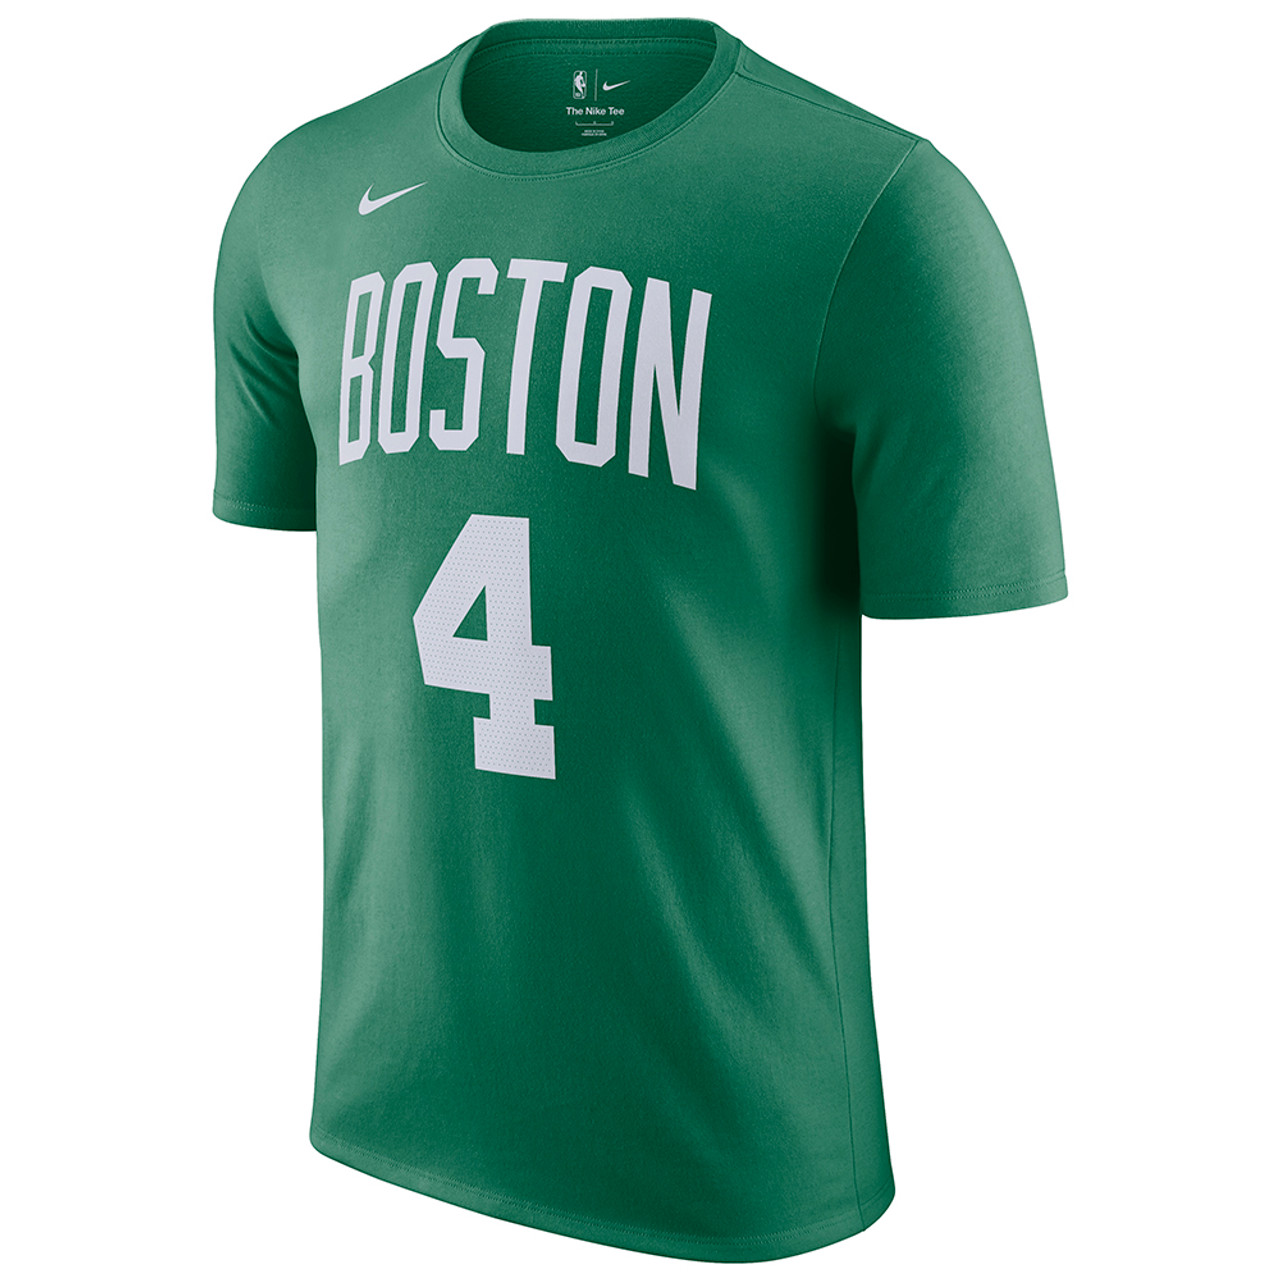 Holiday Nike Name and Number Tee